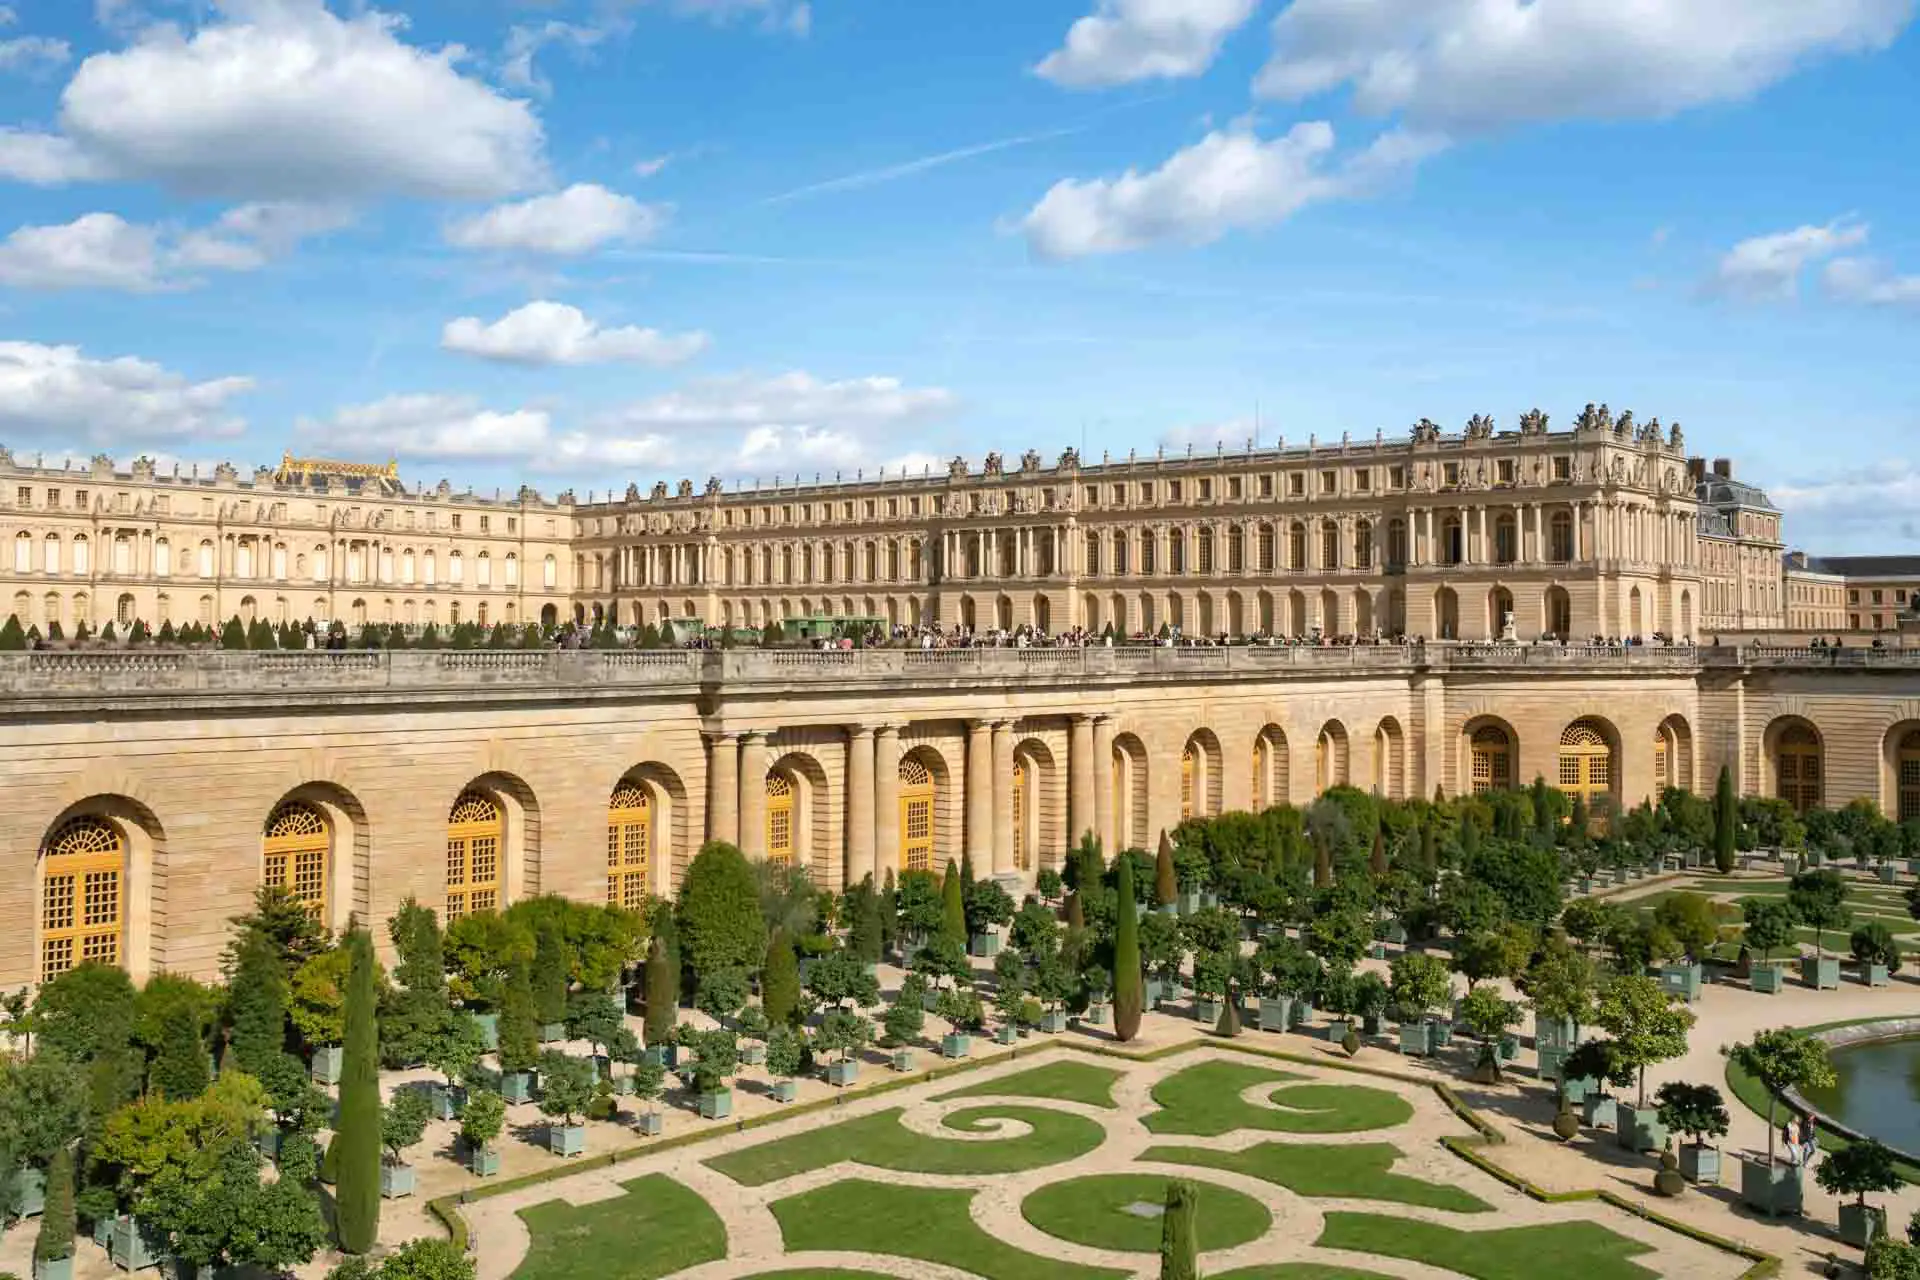 How to plan a day trip to Versailles from Paris